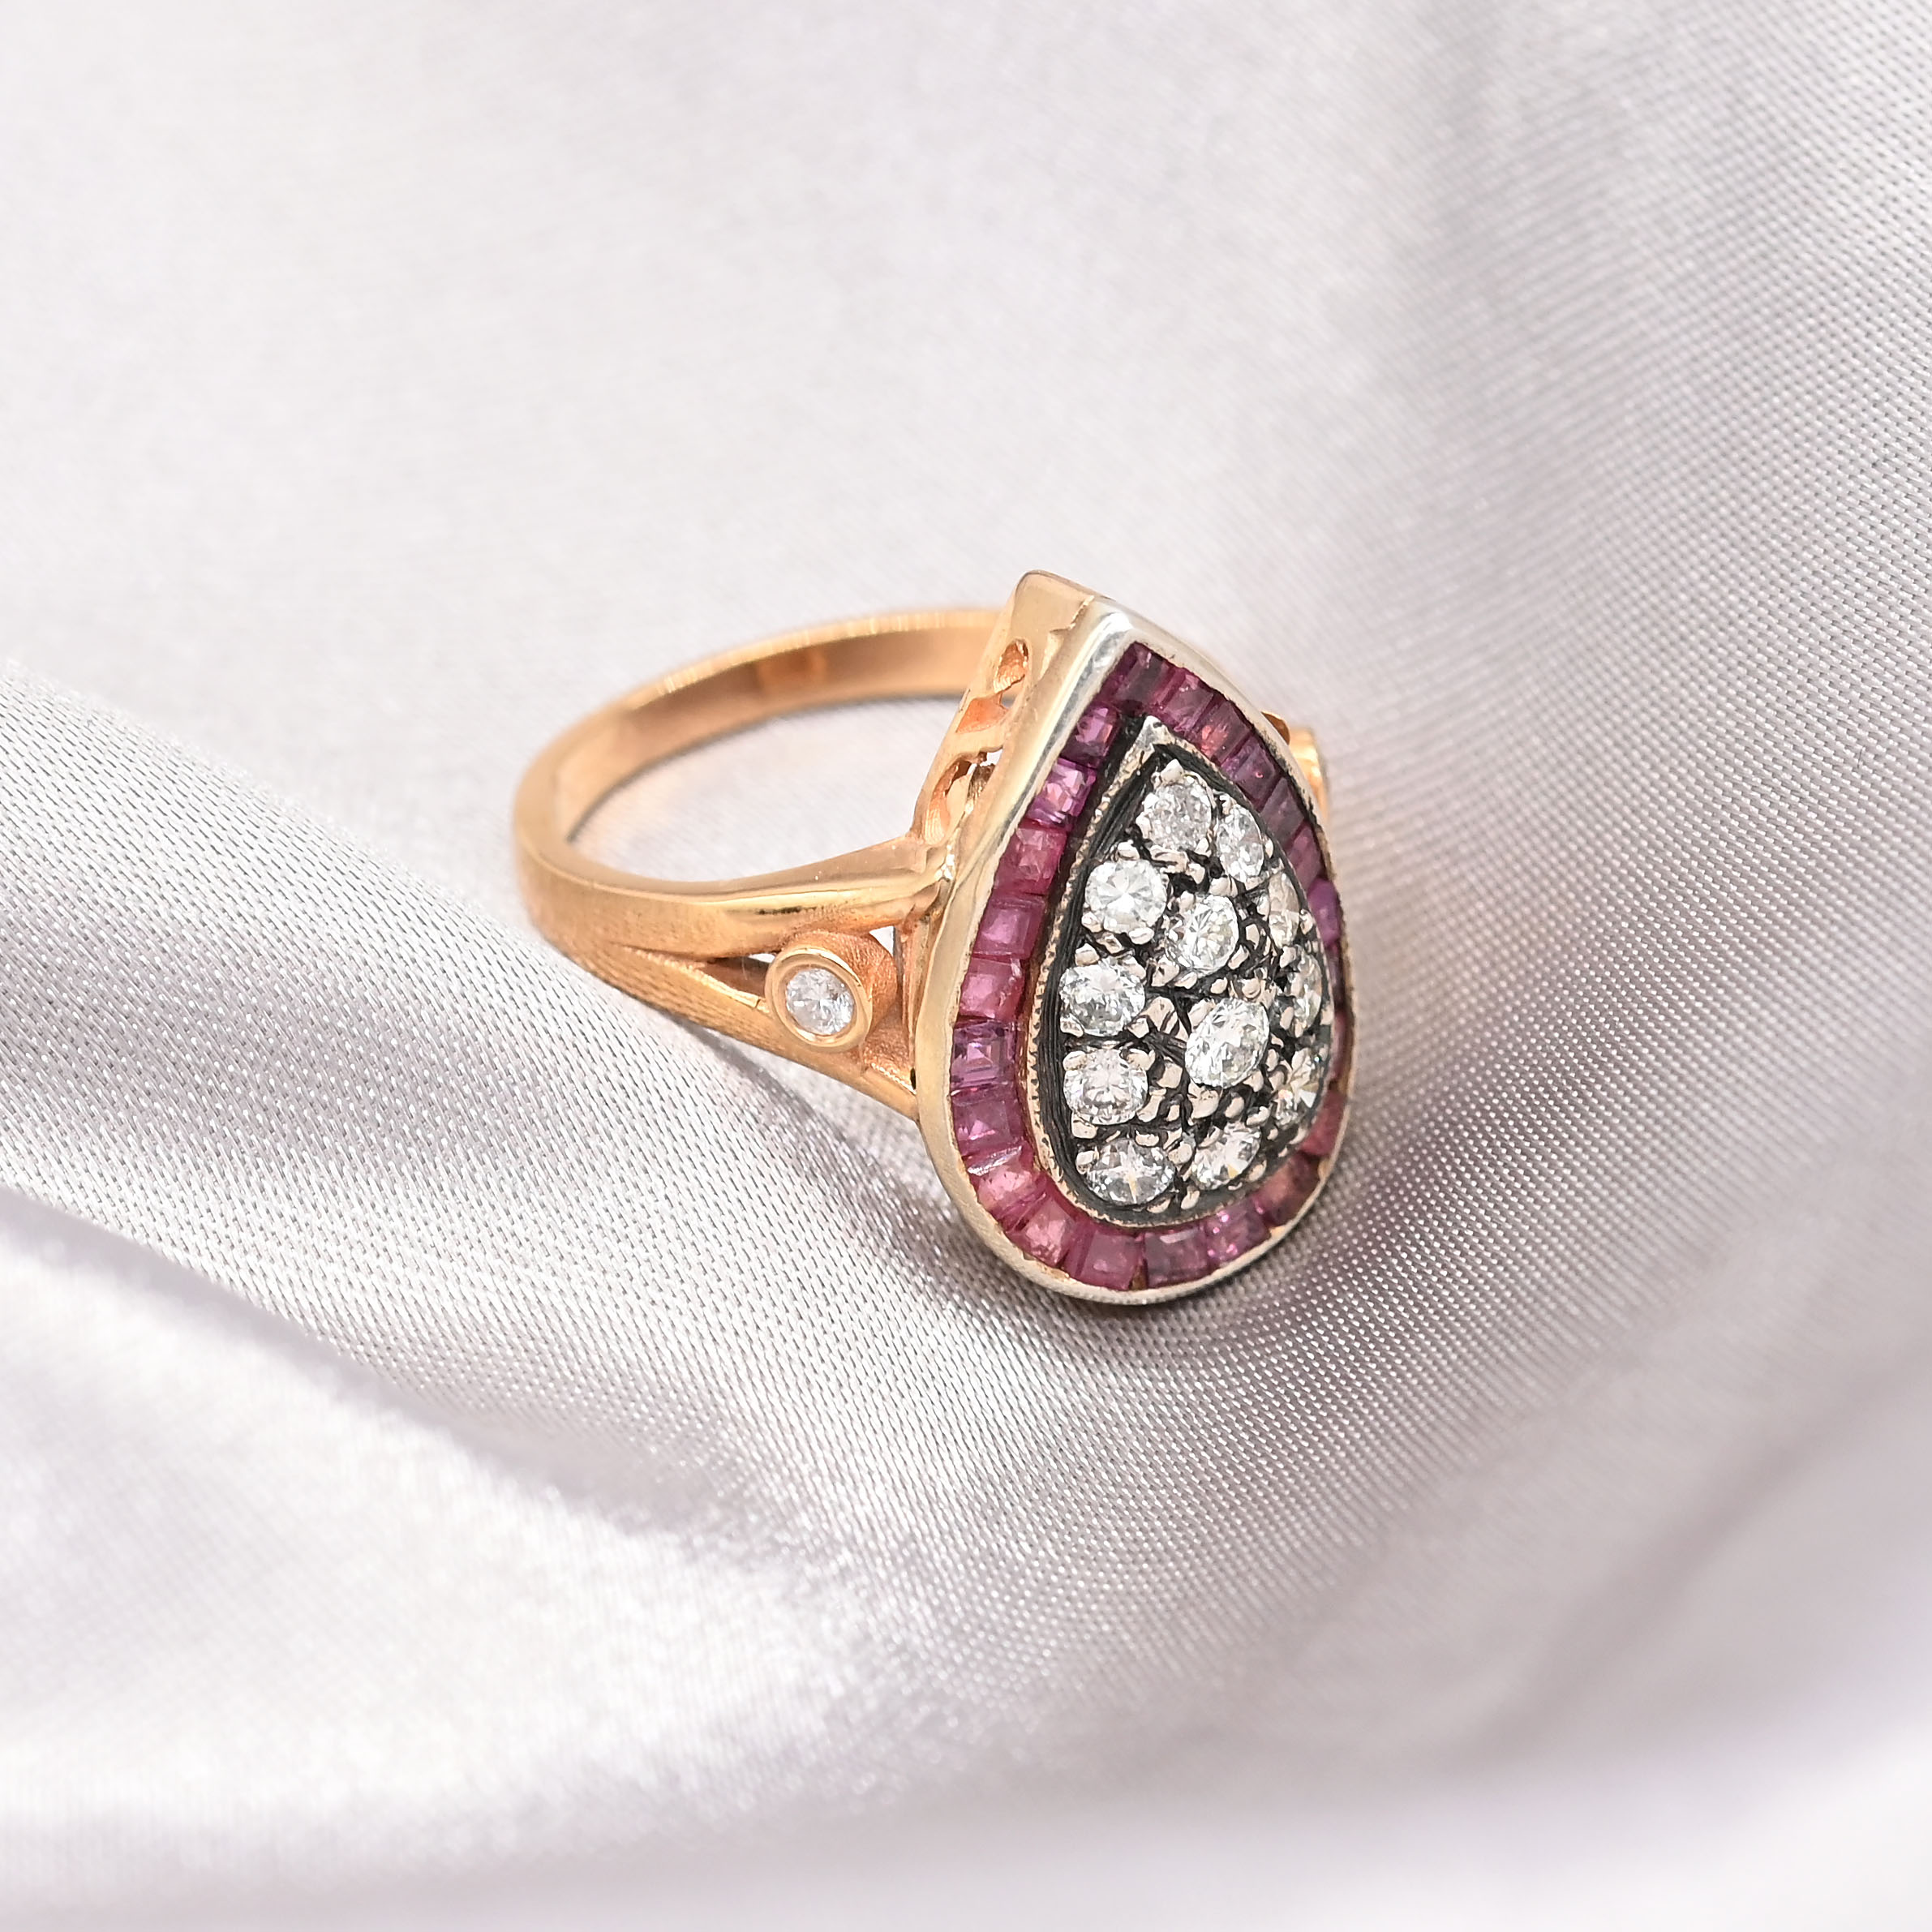 Hand-Made, Vintage Style Ruby and Diamond Pear-Shaped Ring - Image 8 of 8